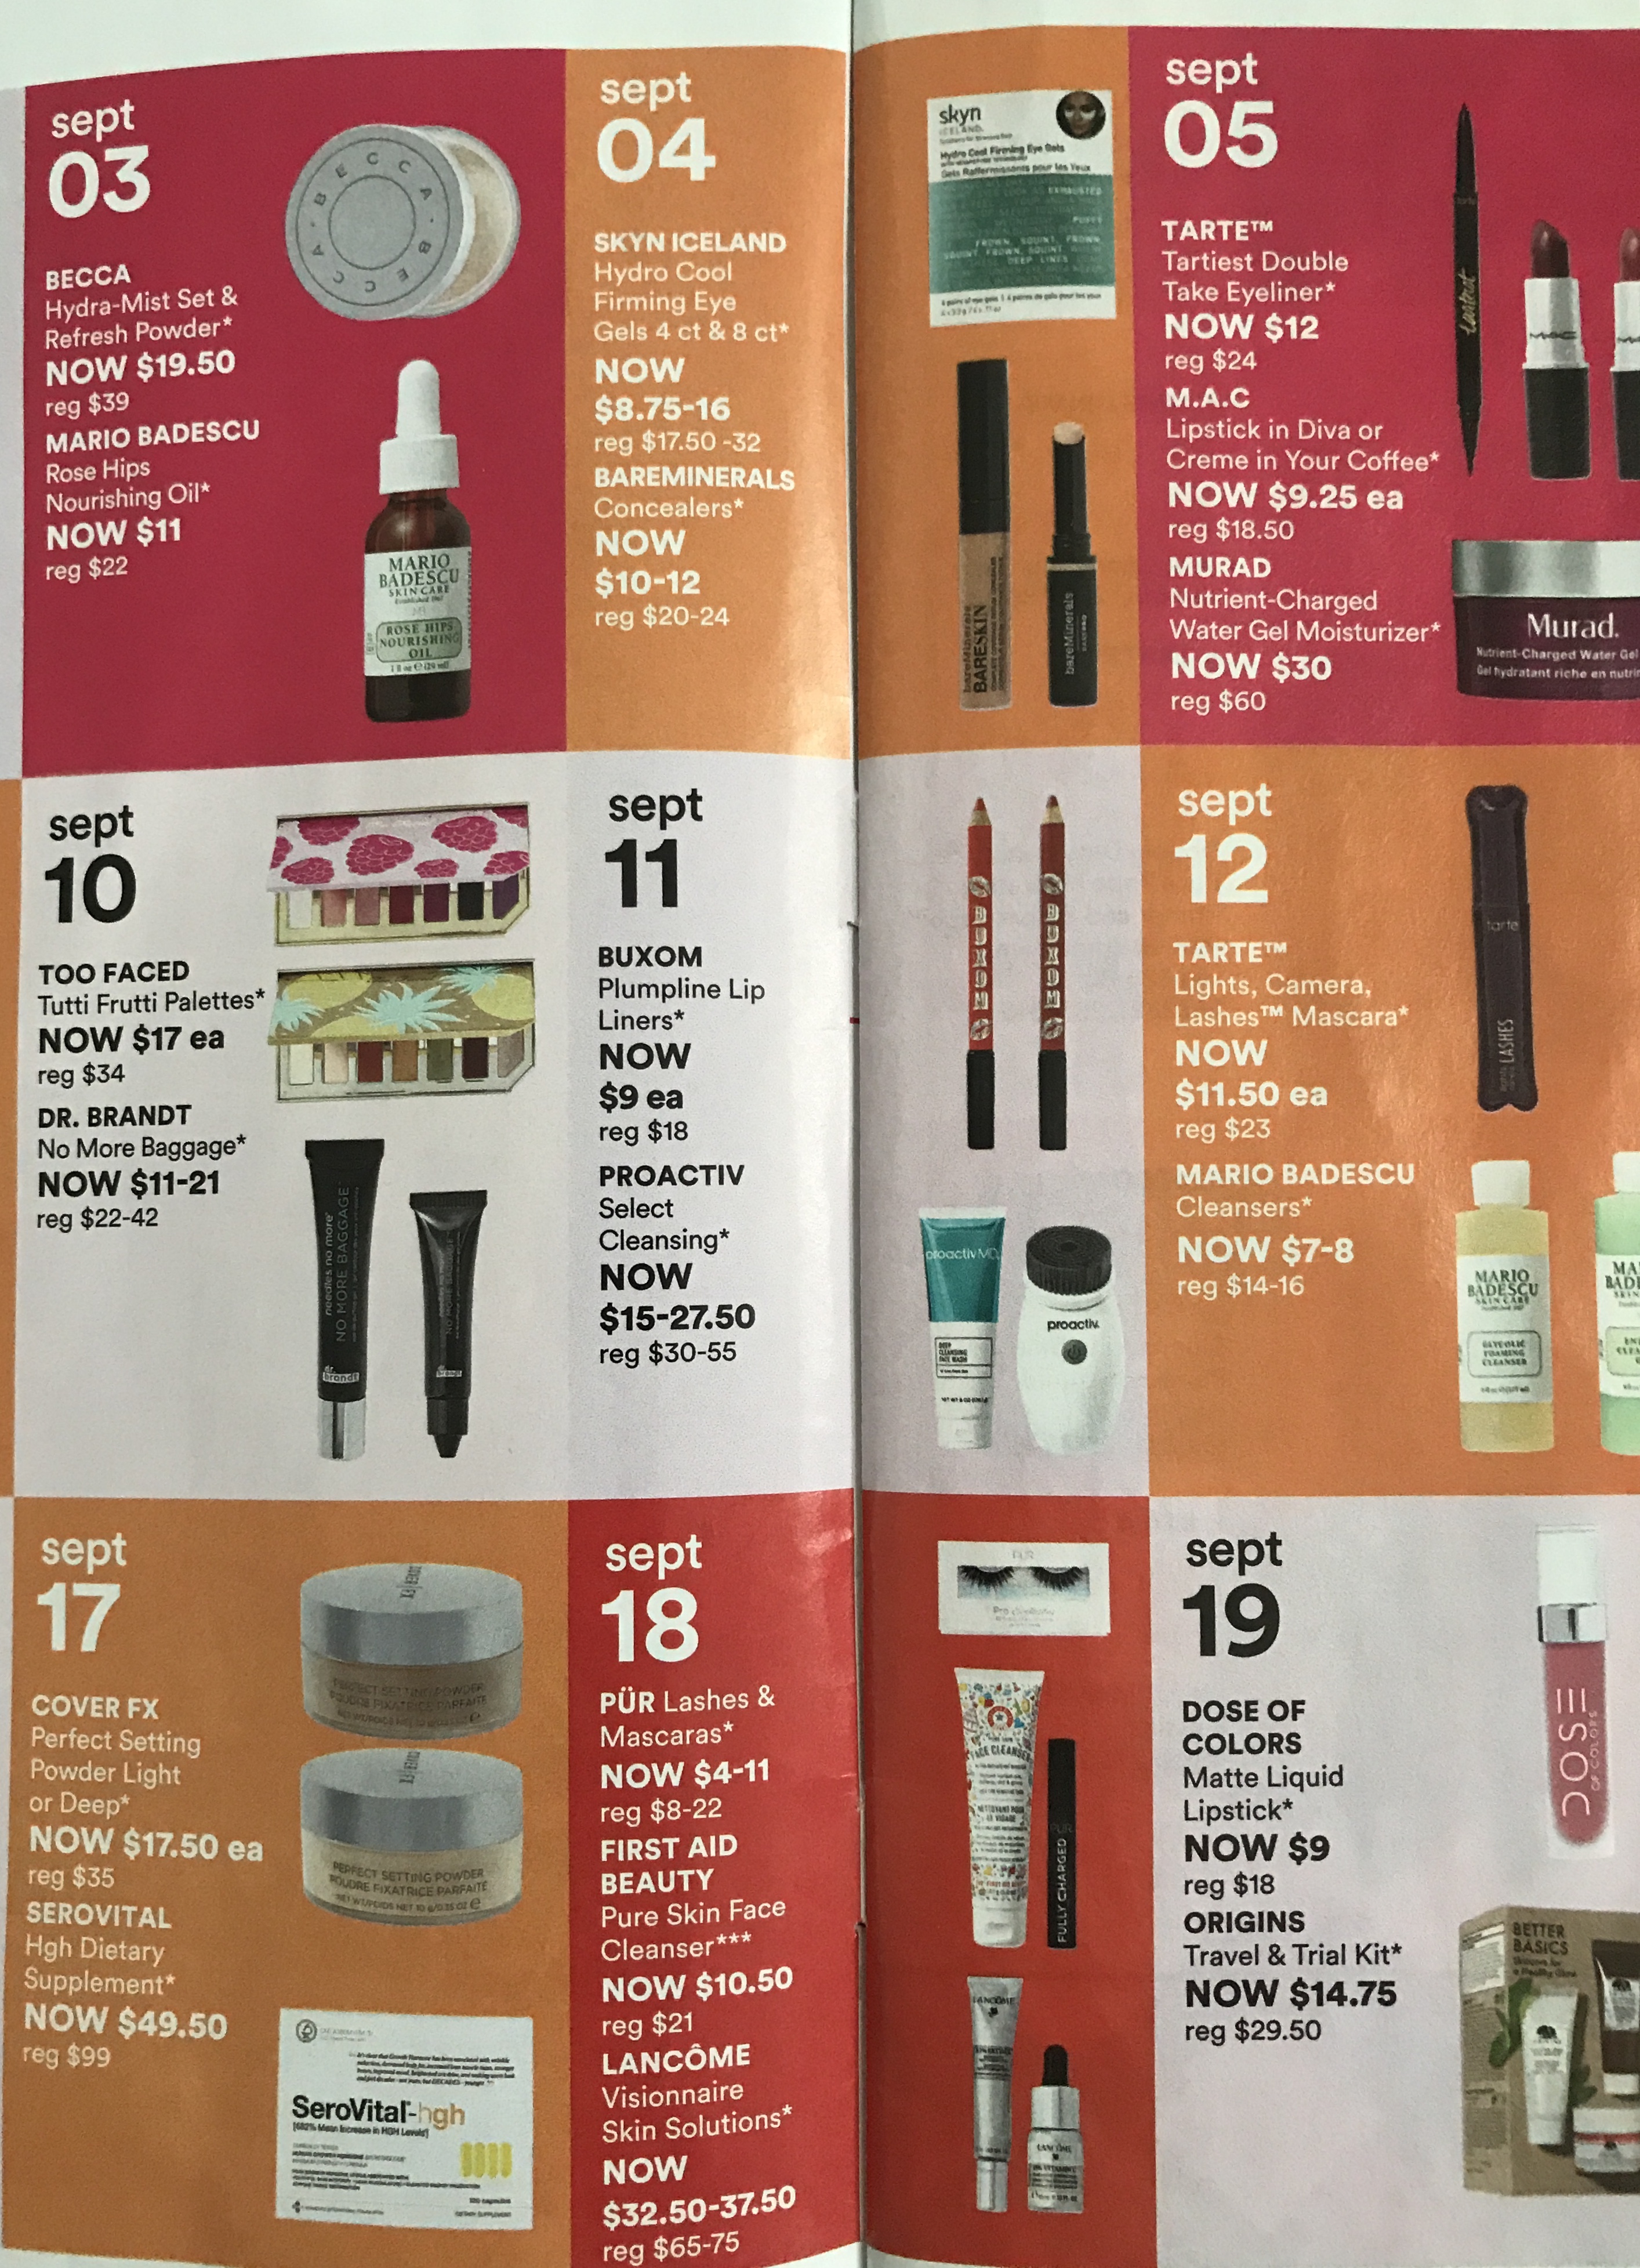 lost of sale items on each calendar day from Sept 1-21 for Ulta 21 Days of Beauty - middle column of the catalogue